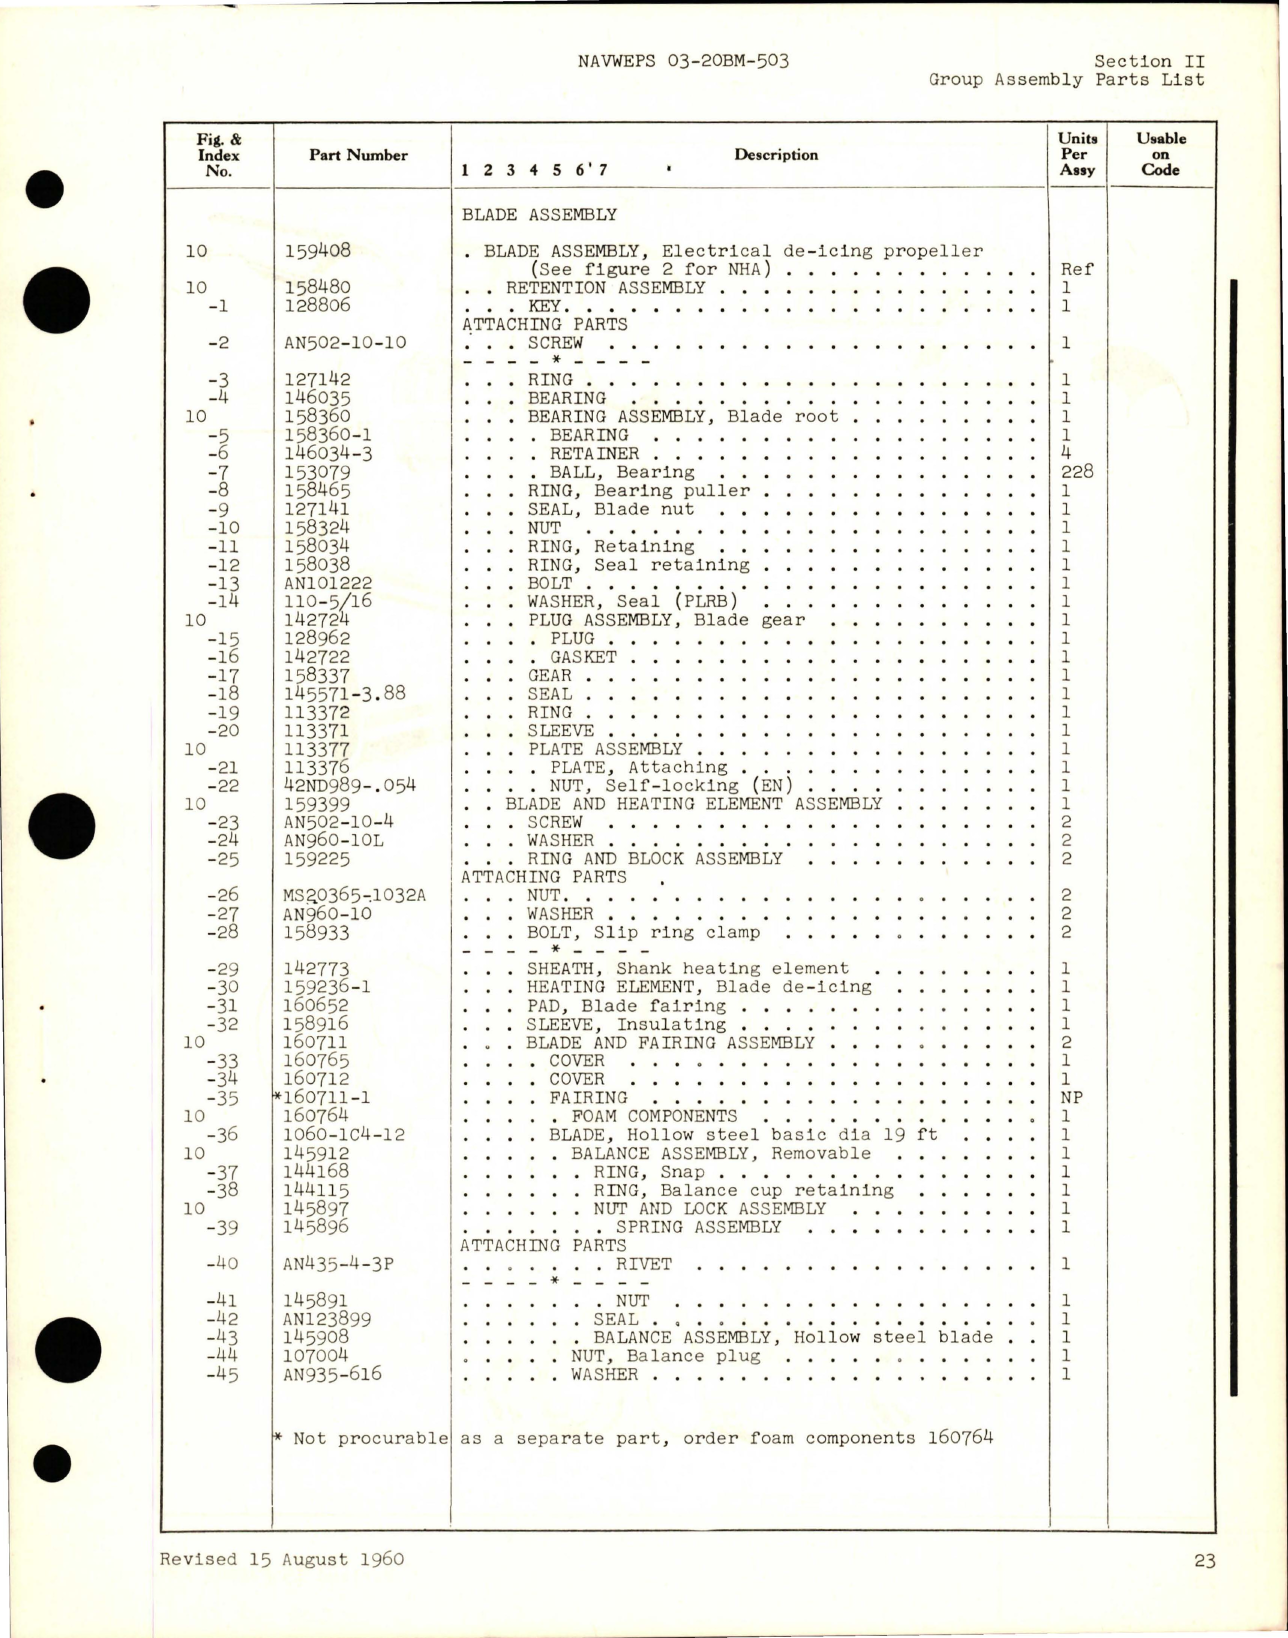 Sample page 5 from AirCorps Library document: Illustrated Parts Breakdown for Propeller and Controls - Model C634S-C104